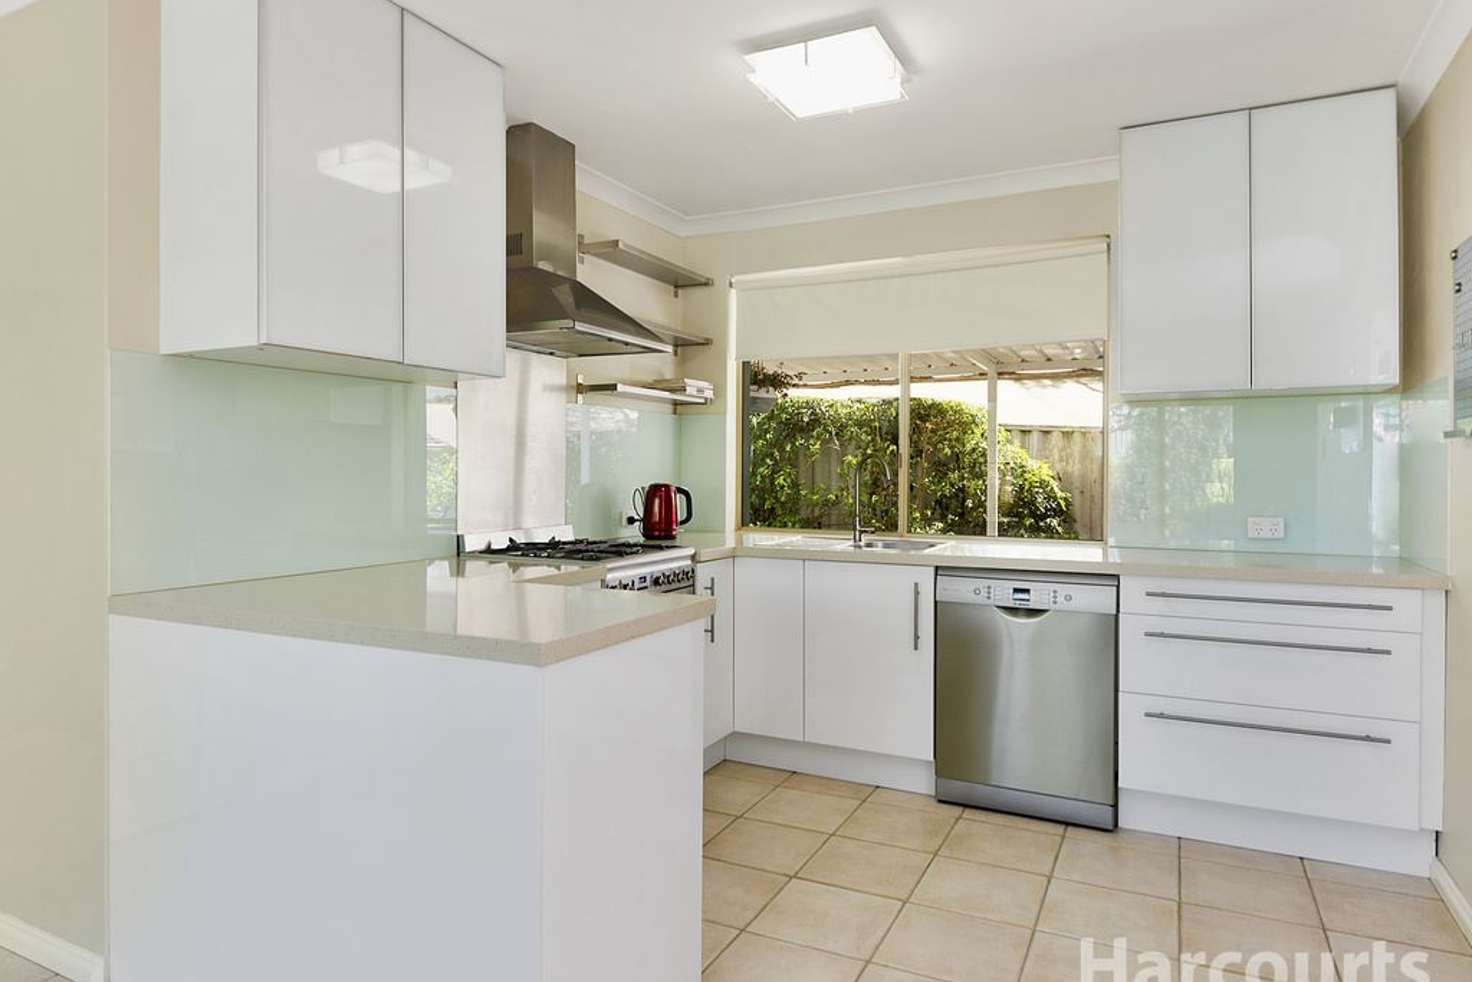 Main view of Homely house listing, 1 Pya Place, Joondalup WA 6027